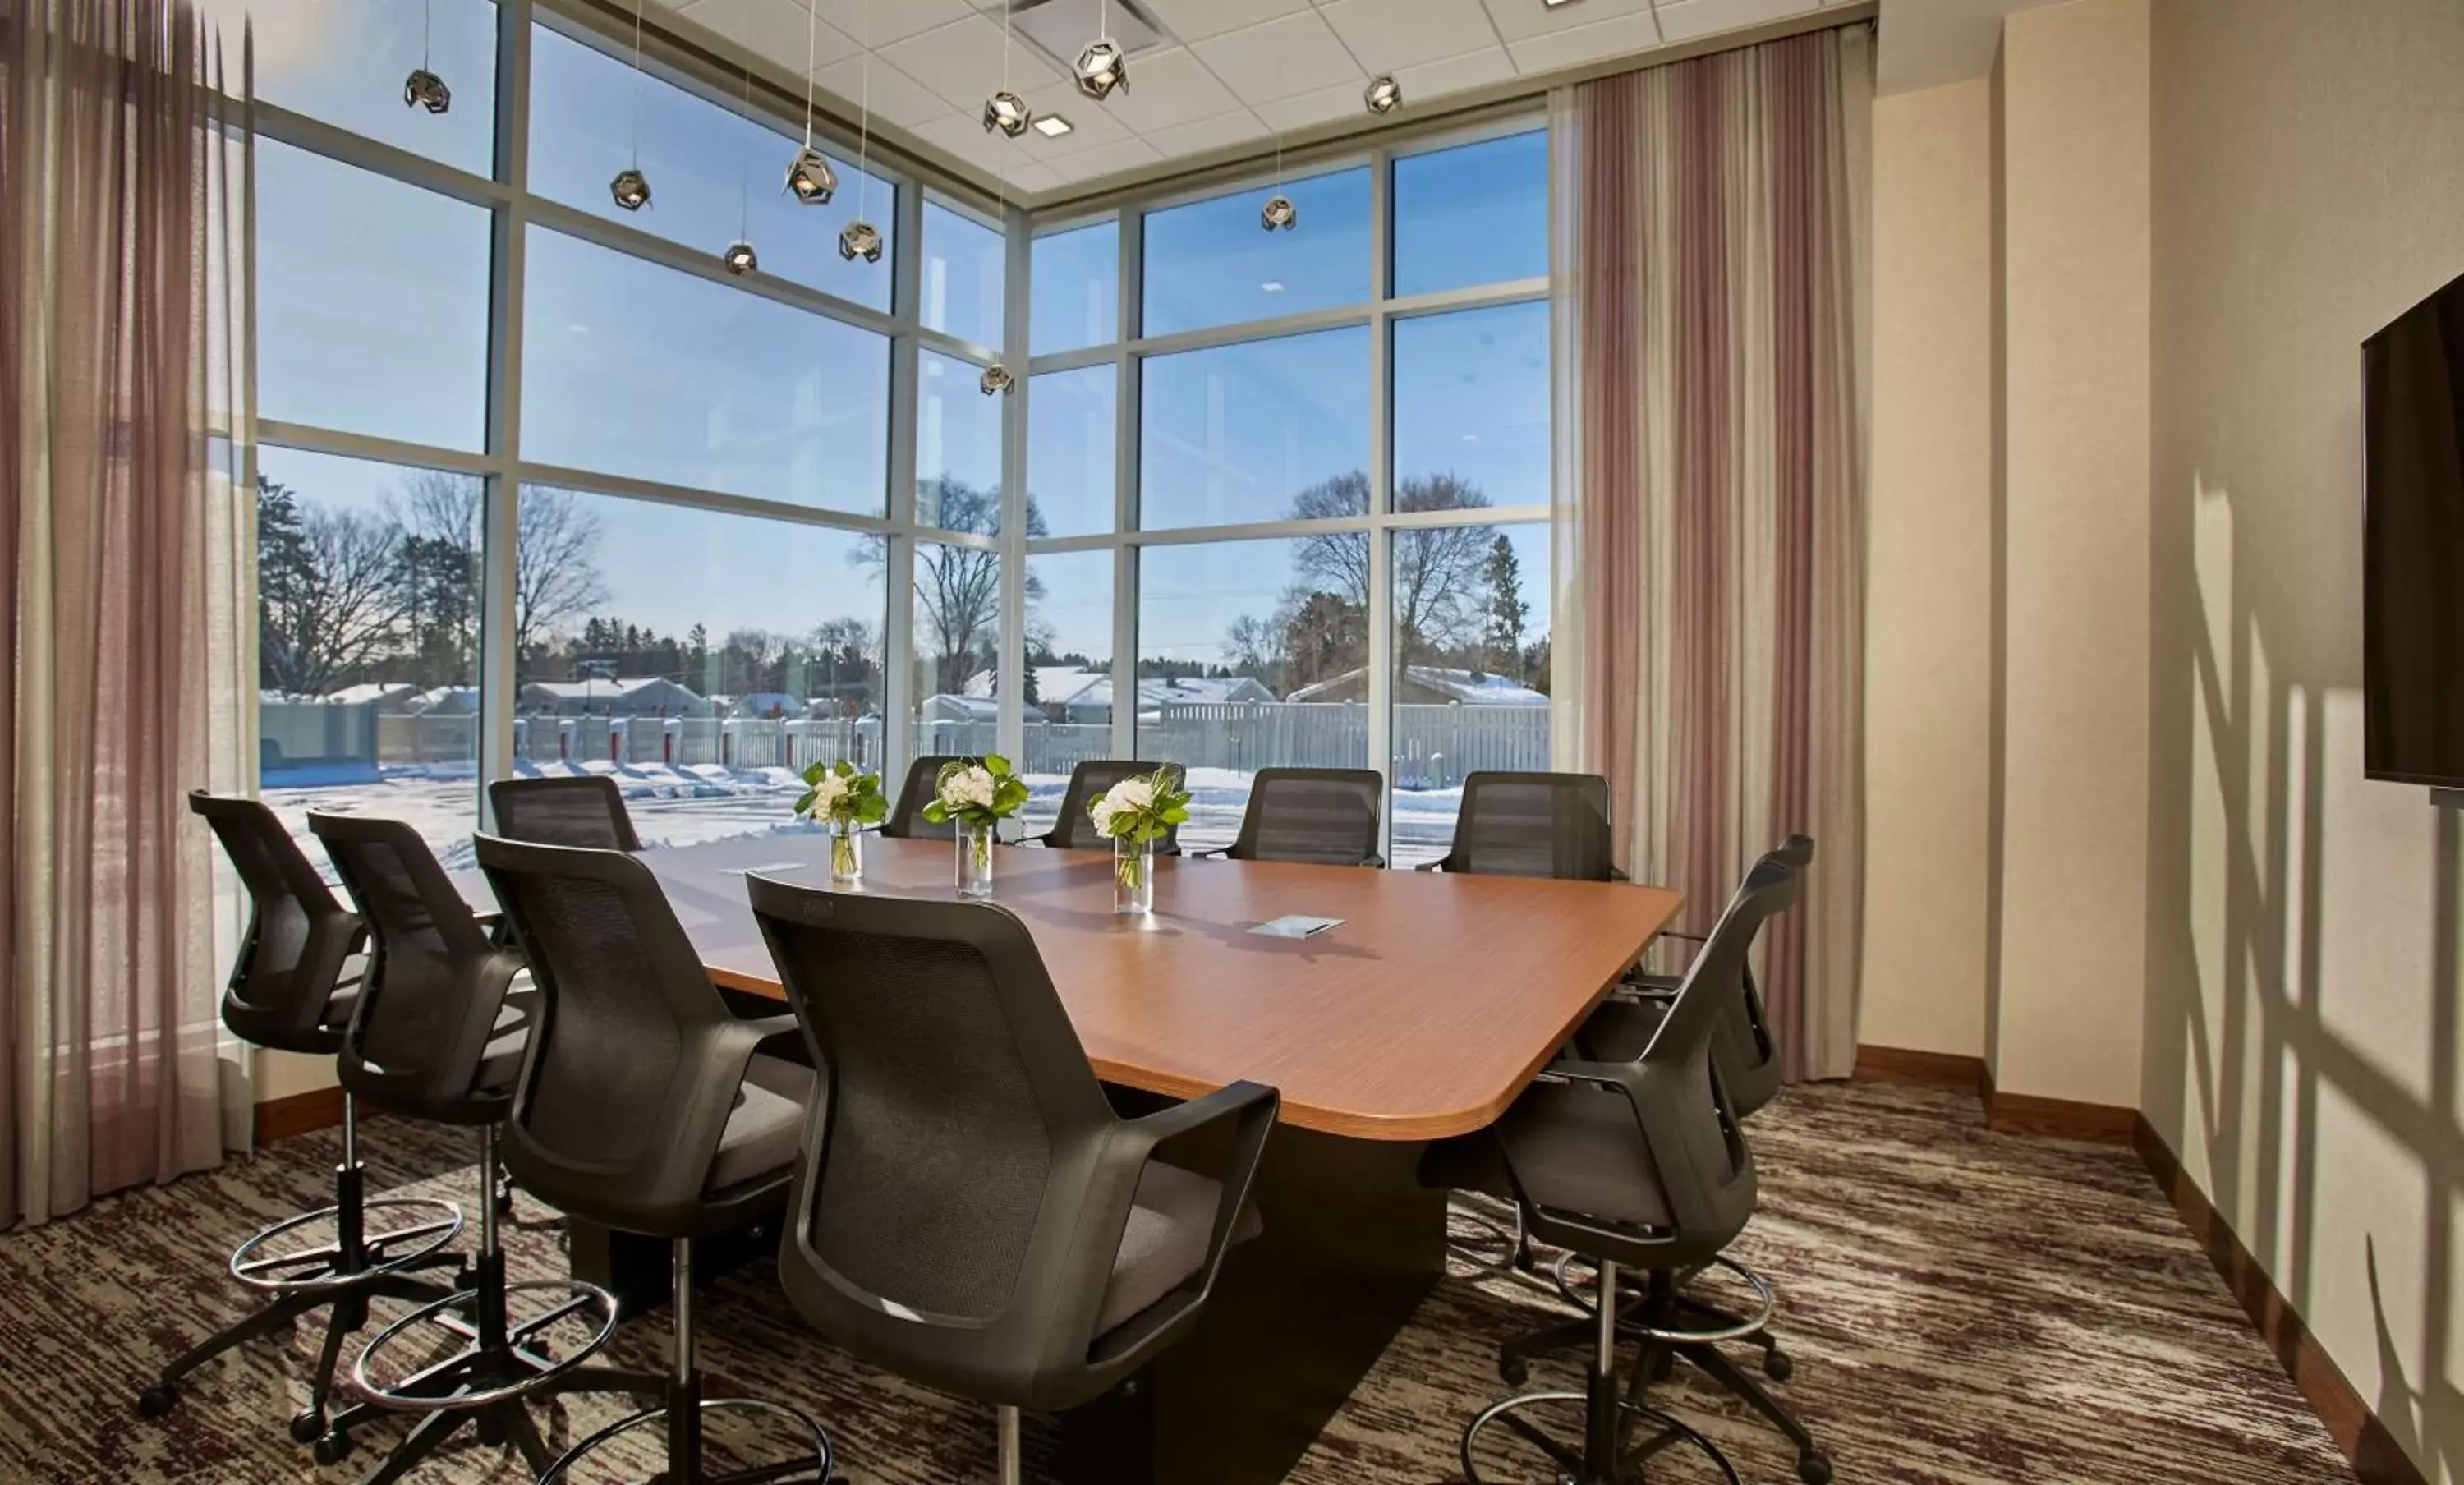 Meeting/conference room in Hilton Garden Inn Wausau, WI